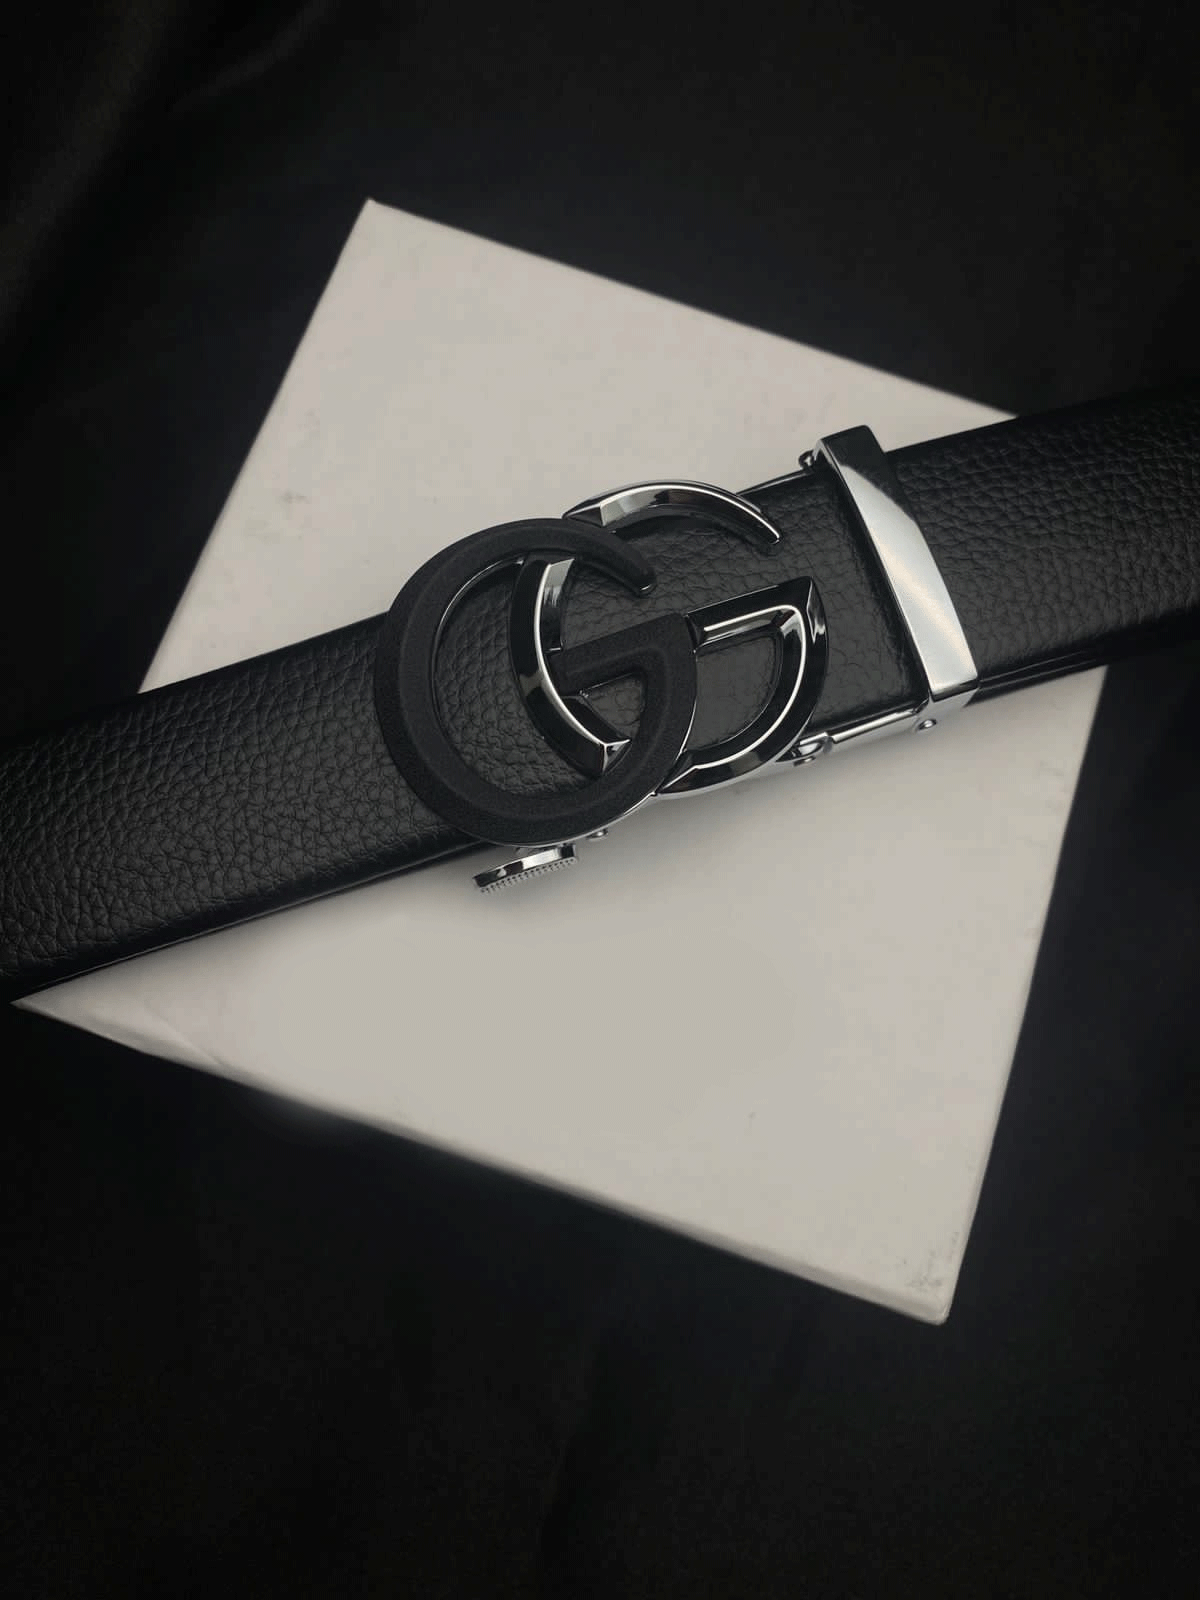 New Fashion Designer Double GG Later Buckle High Quality Belt For Men-Unique and Classy